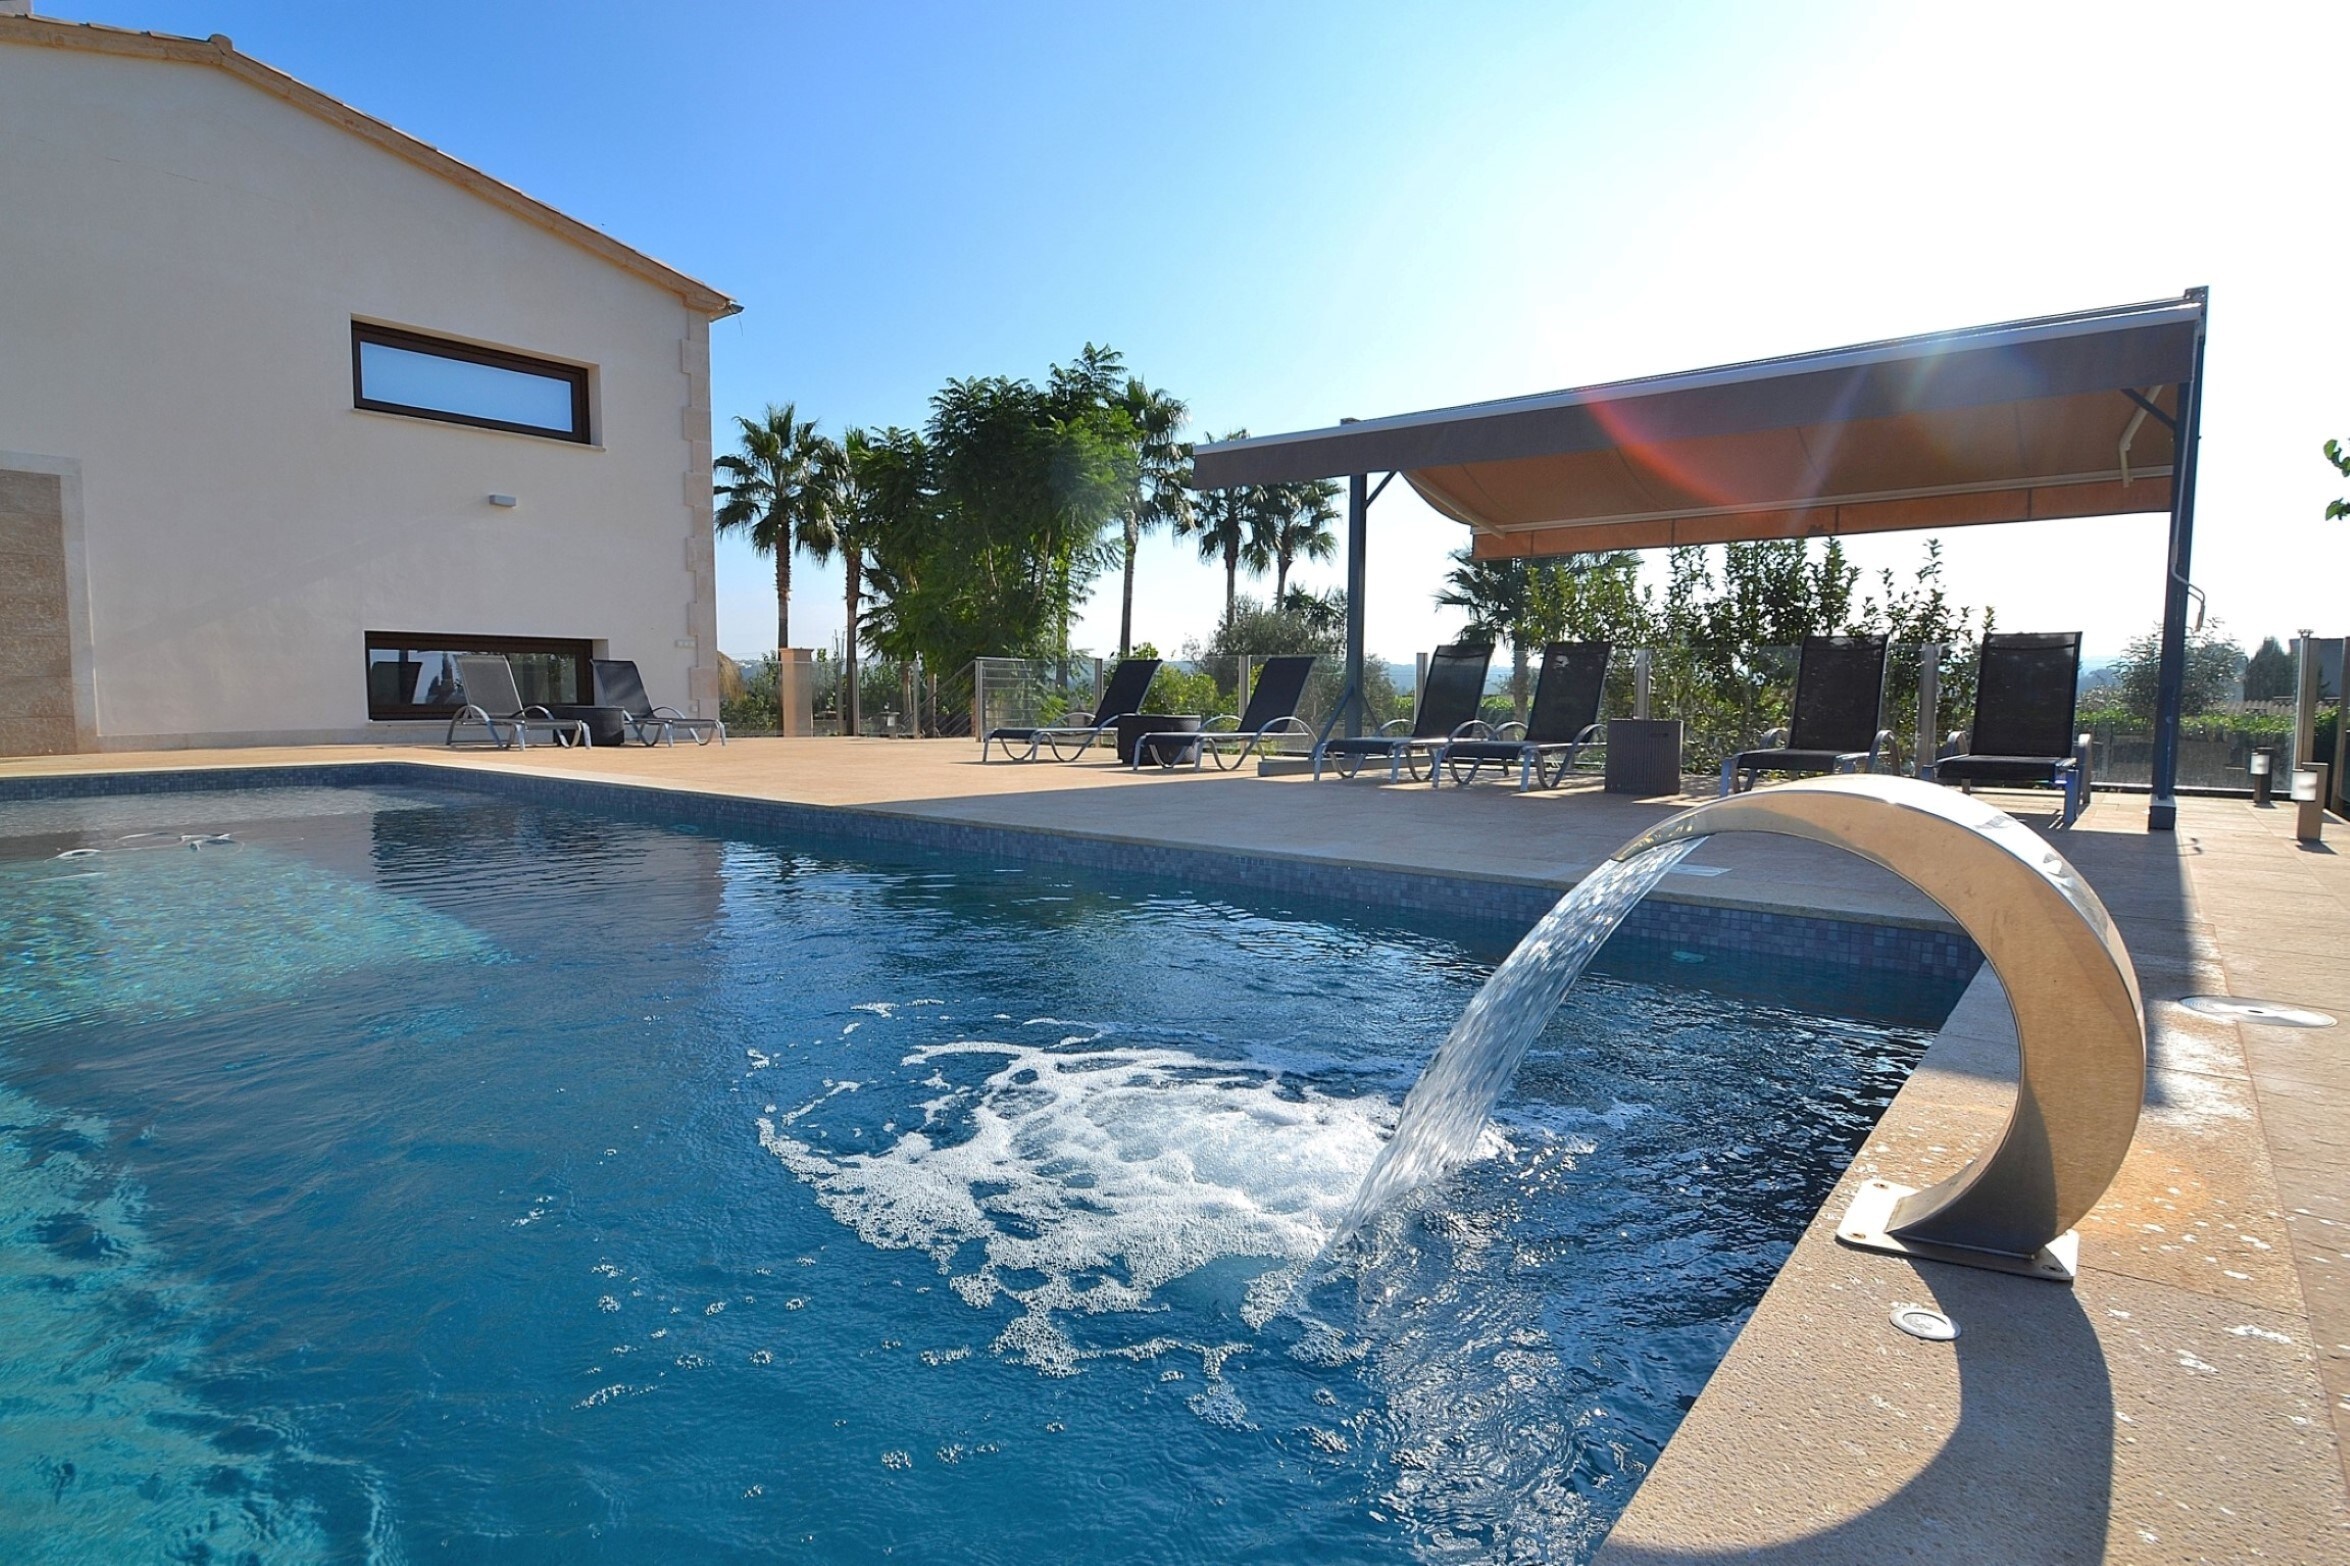 The villa is located in Muro Mallorca and has a large pool